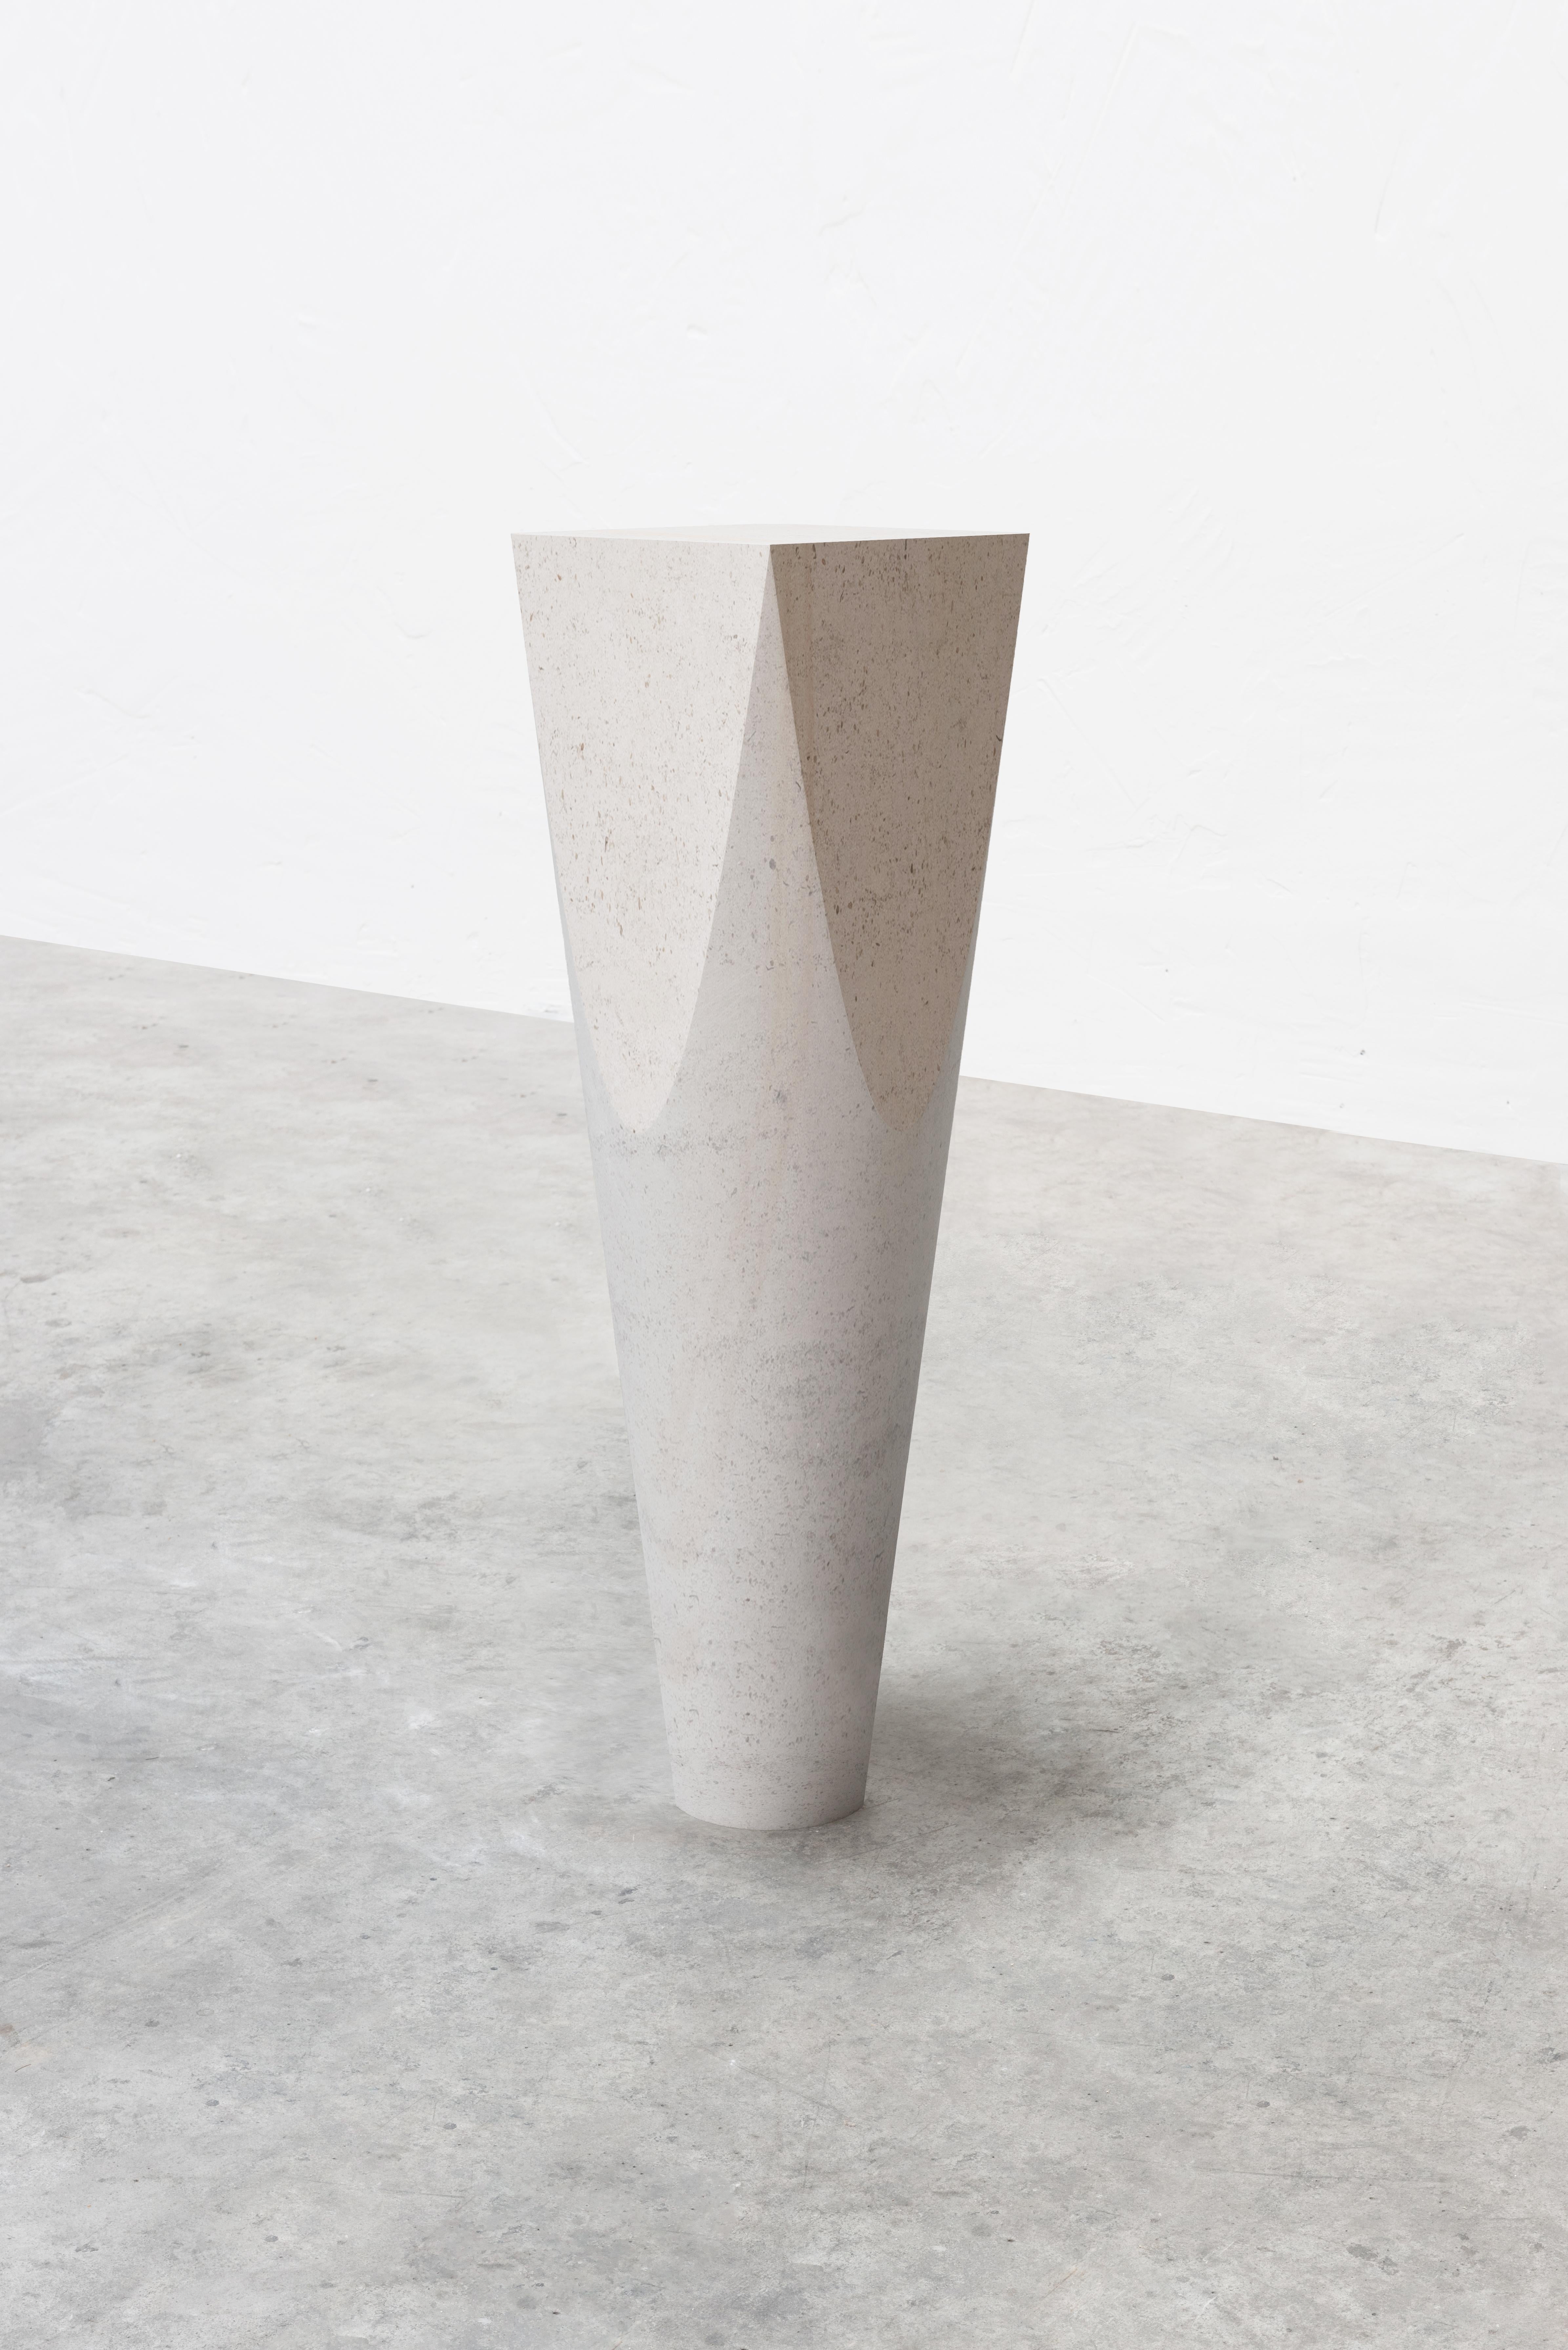 Arch Buffon marble column pedestal by Frédéric Saulou
Limited edition: 1 / 12
Designer: Frederic Saulou
Materials: Ornemental Limestone Buffon.
Dimensions: L 22 x W 22 x H 90 cm

Born in 1989, Frédéric Saulou, lives and works in Rennes, in France.